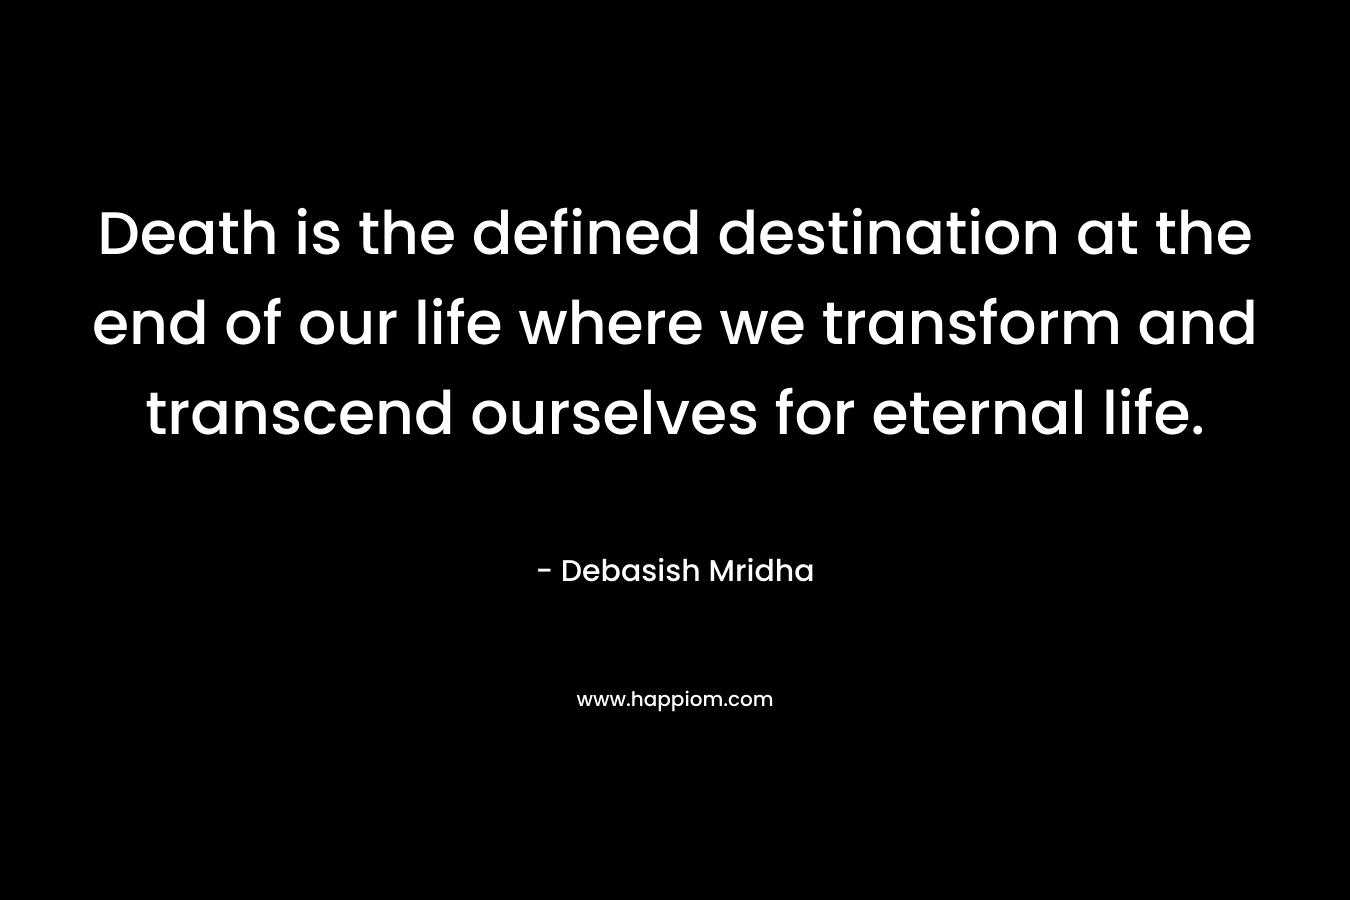 Death is the defined destination at the end of our life where we transform and transcend ourselves for eternal life. – Debasish Mridha